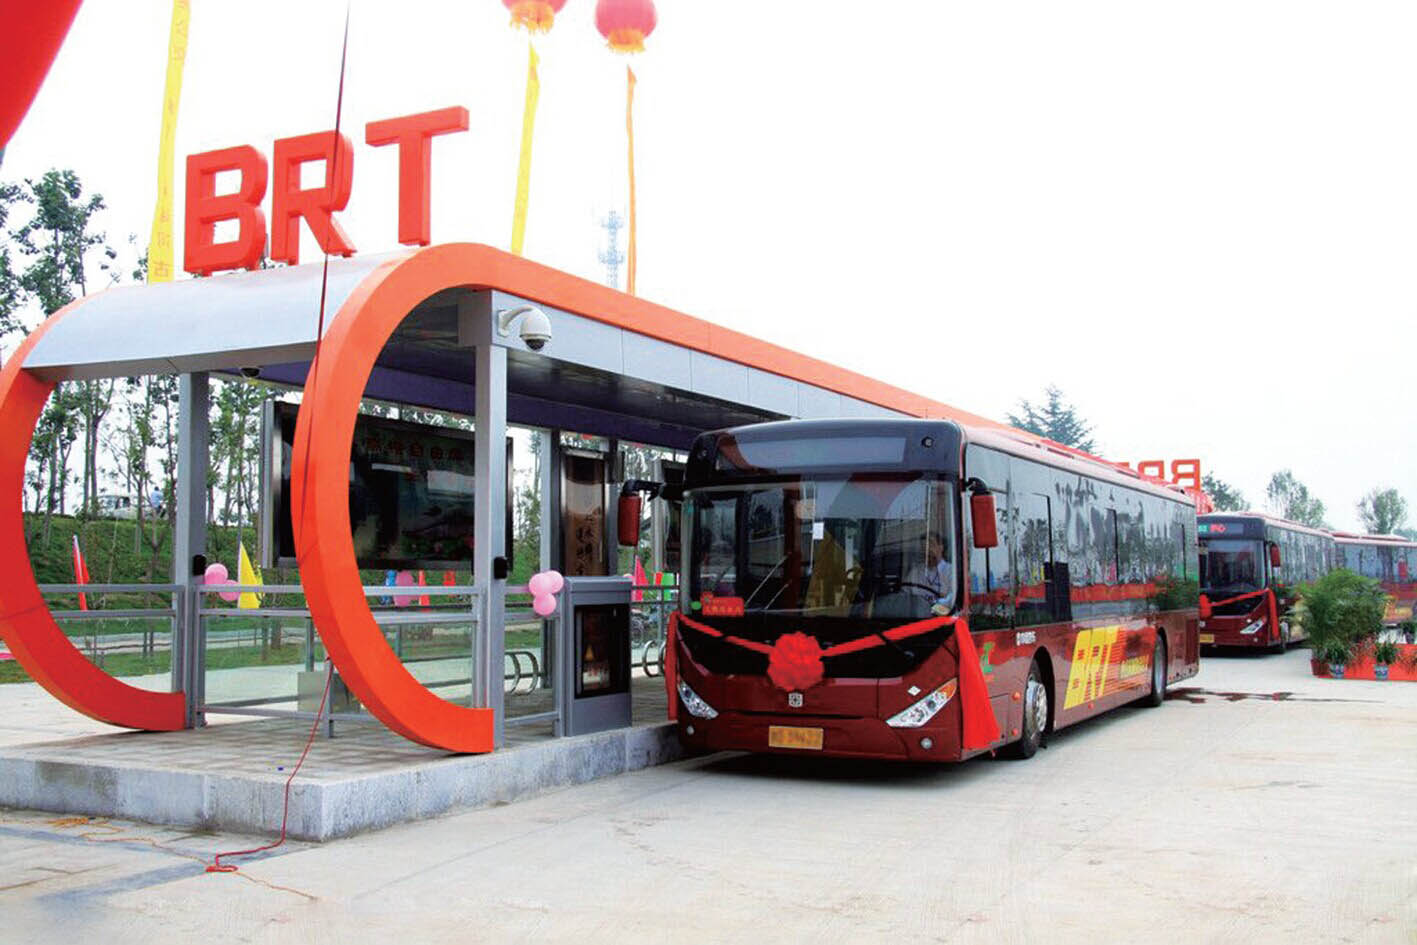 Guiyang's first BRT to open in 2017